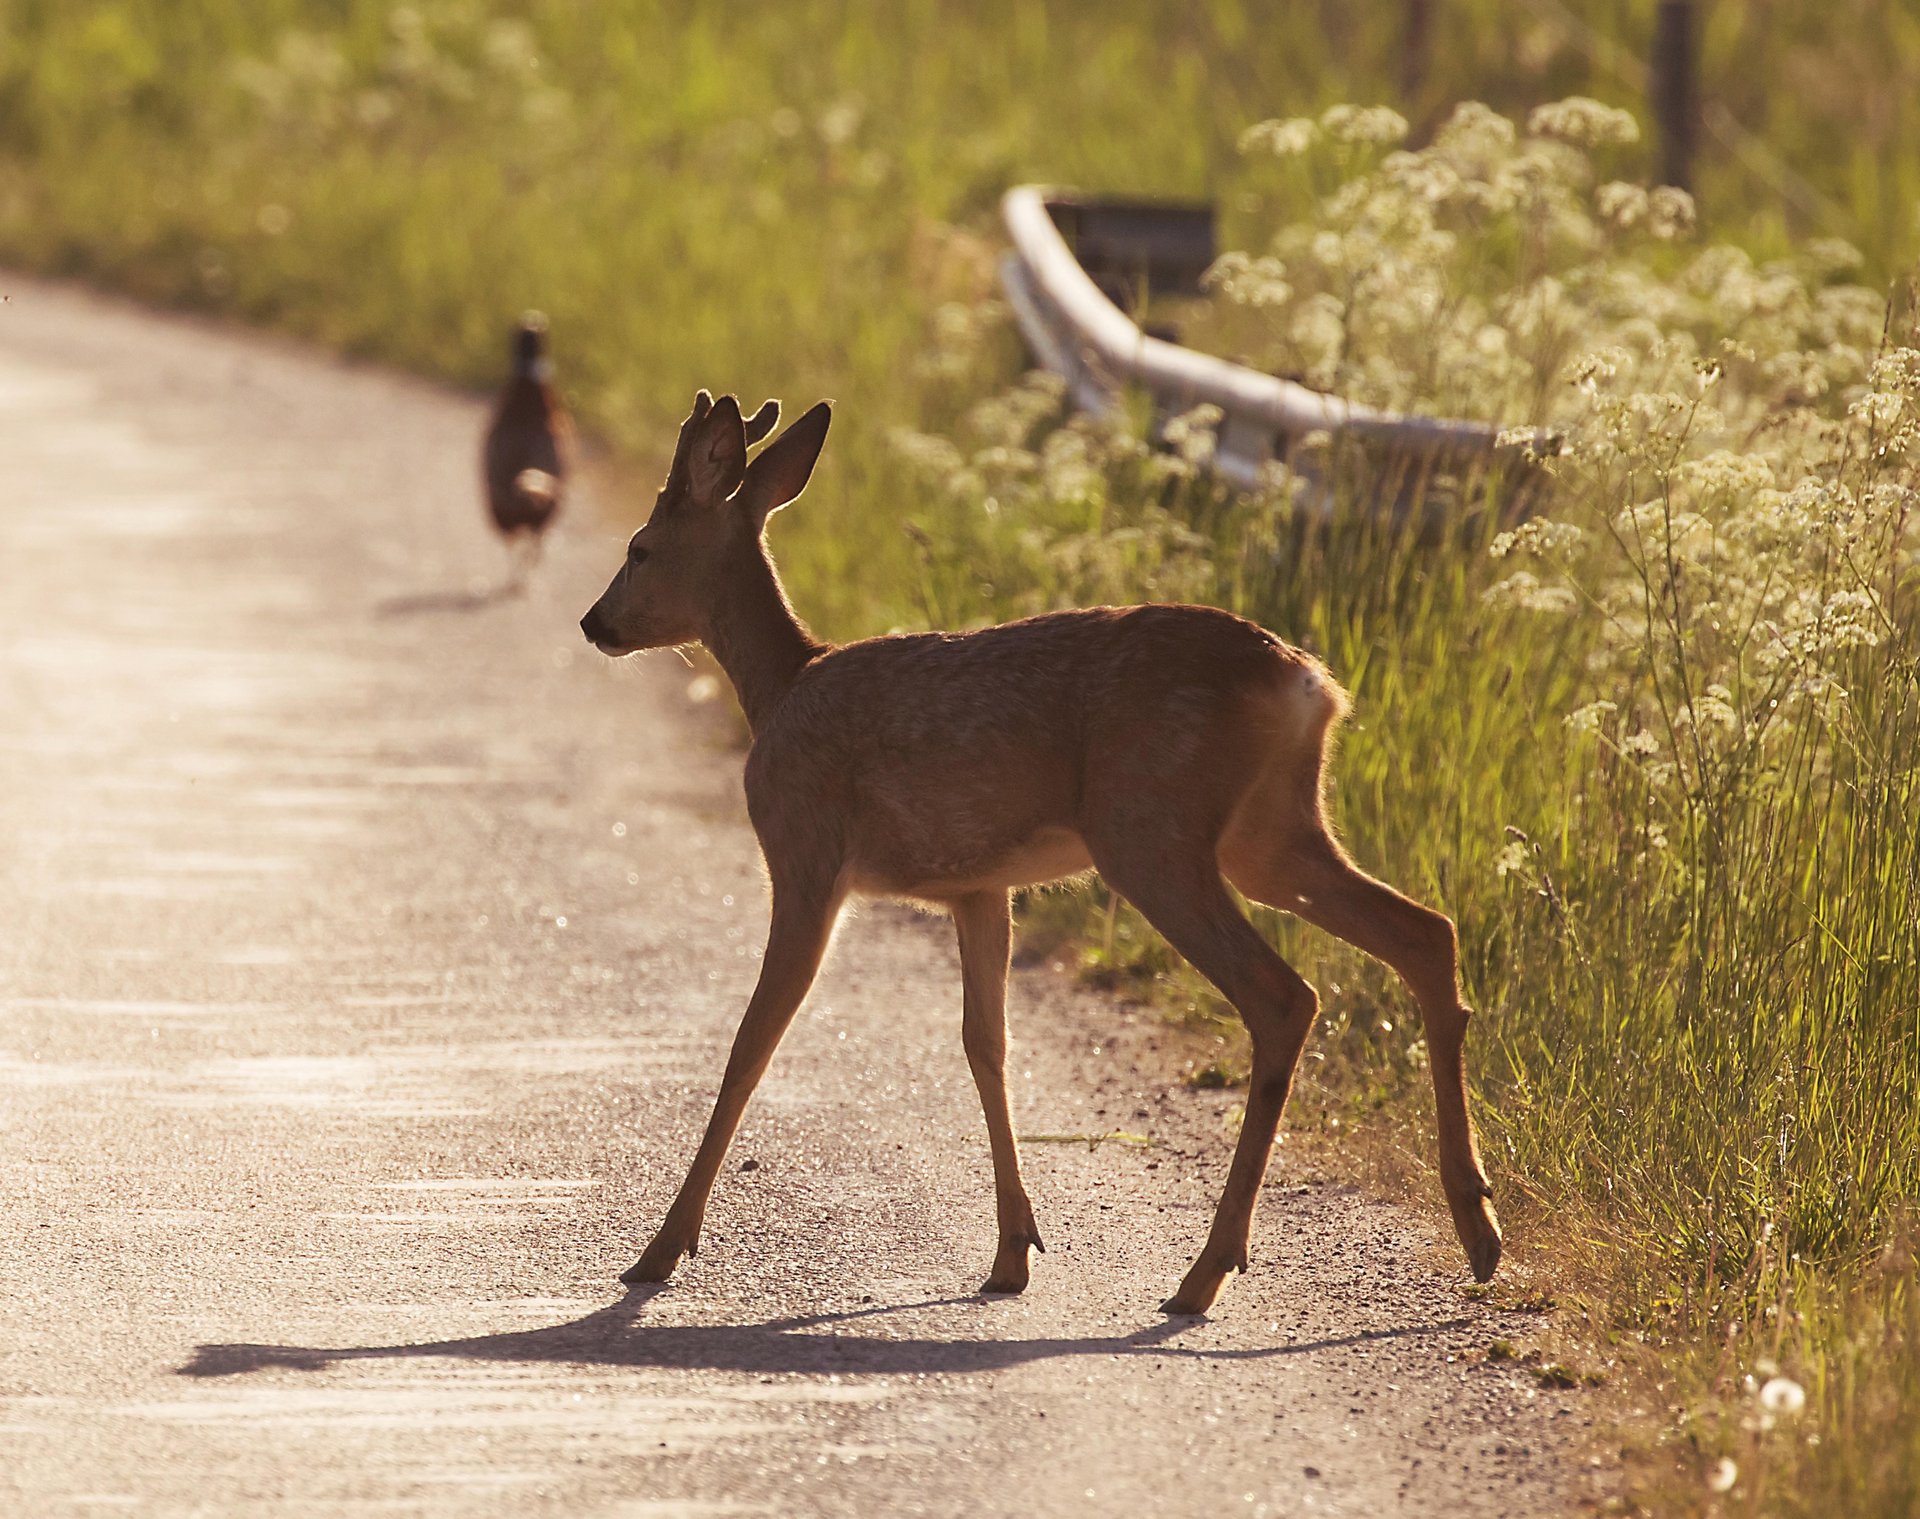 News Picture: Another Reason to Keep Daylight Saving Time: Fewer Deer-Car Collisions